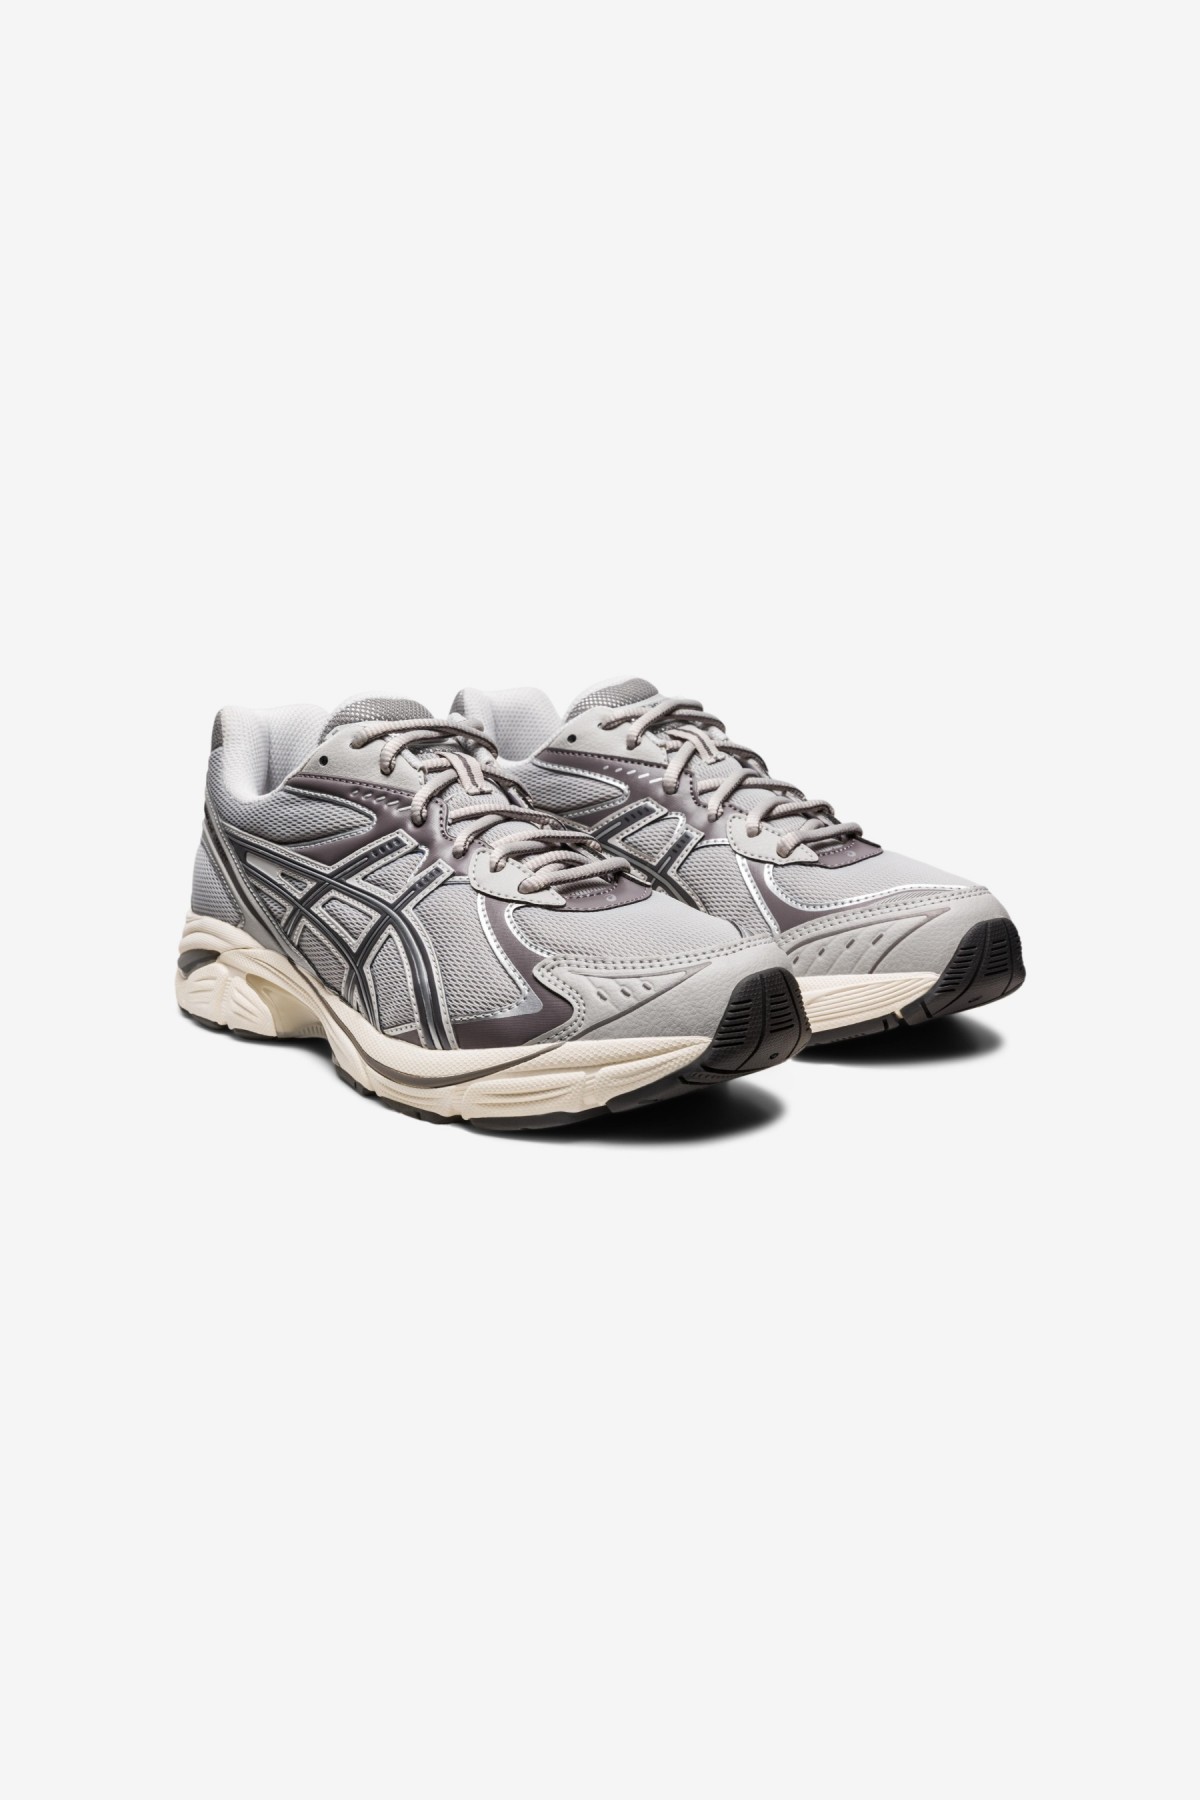 Asics GT-2160 in Oyster Grey/Carbon